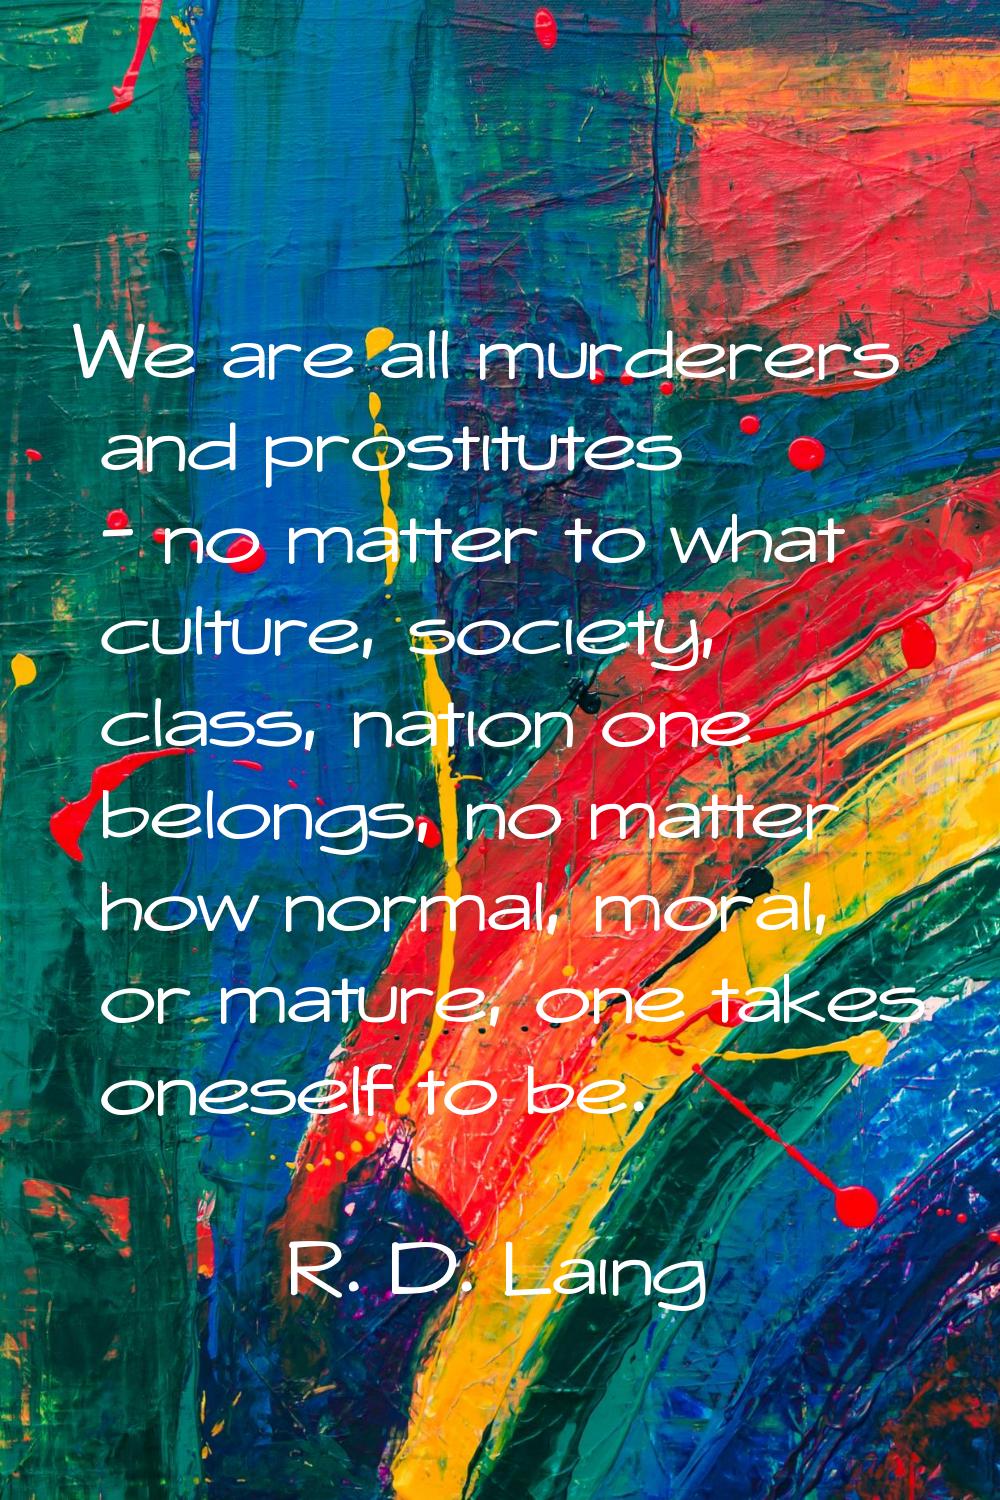 We are all murderers and prostitutes - no matter to what culture, society, class, nation one belong